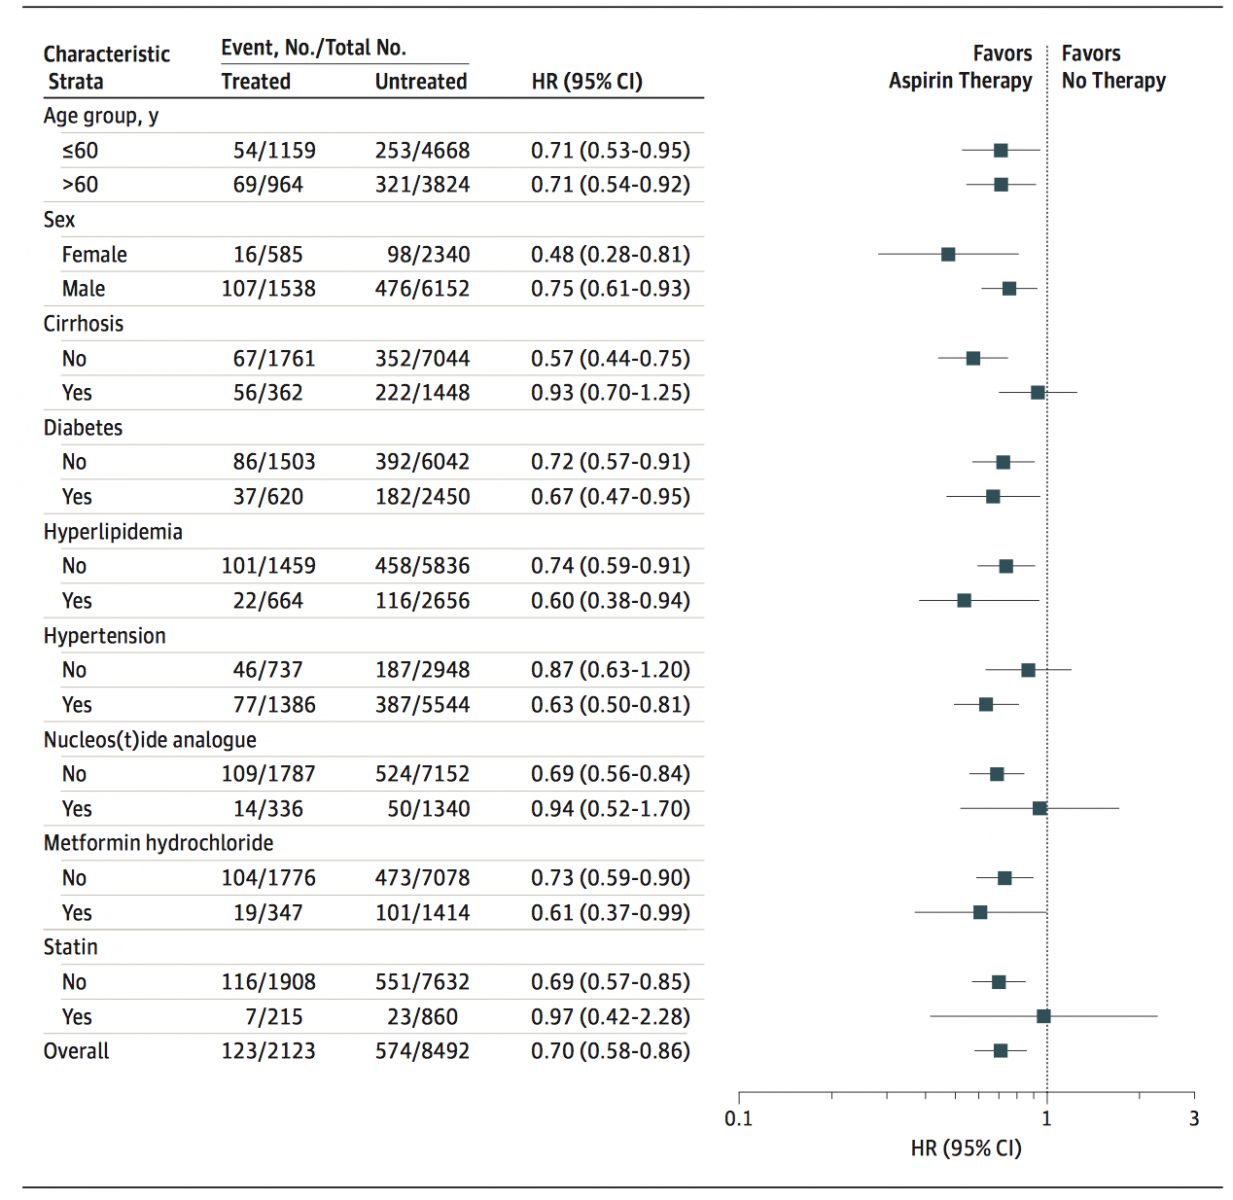 Daily use of aspirin for 90 days or more days was associated with 29% HCC risk reduction